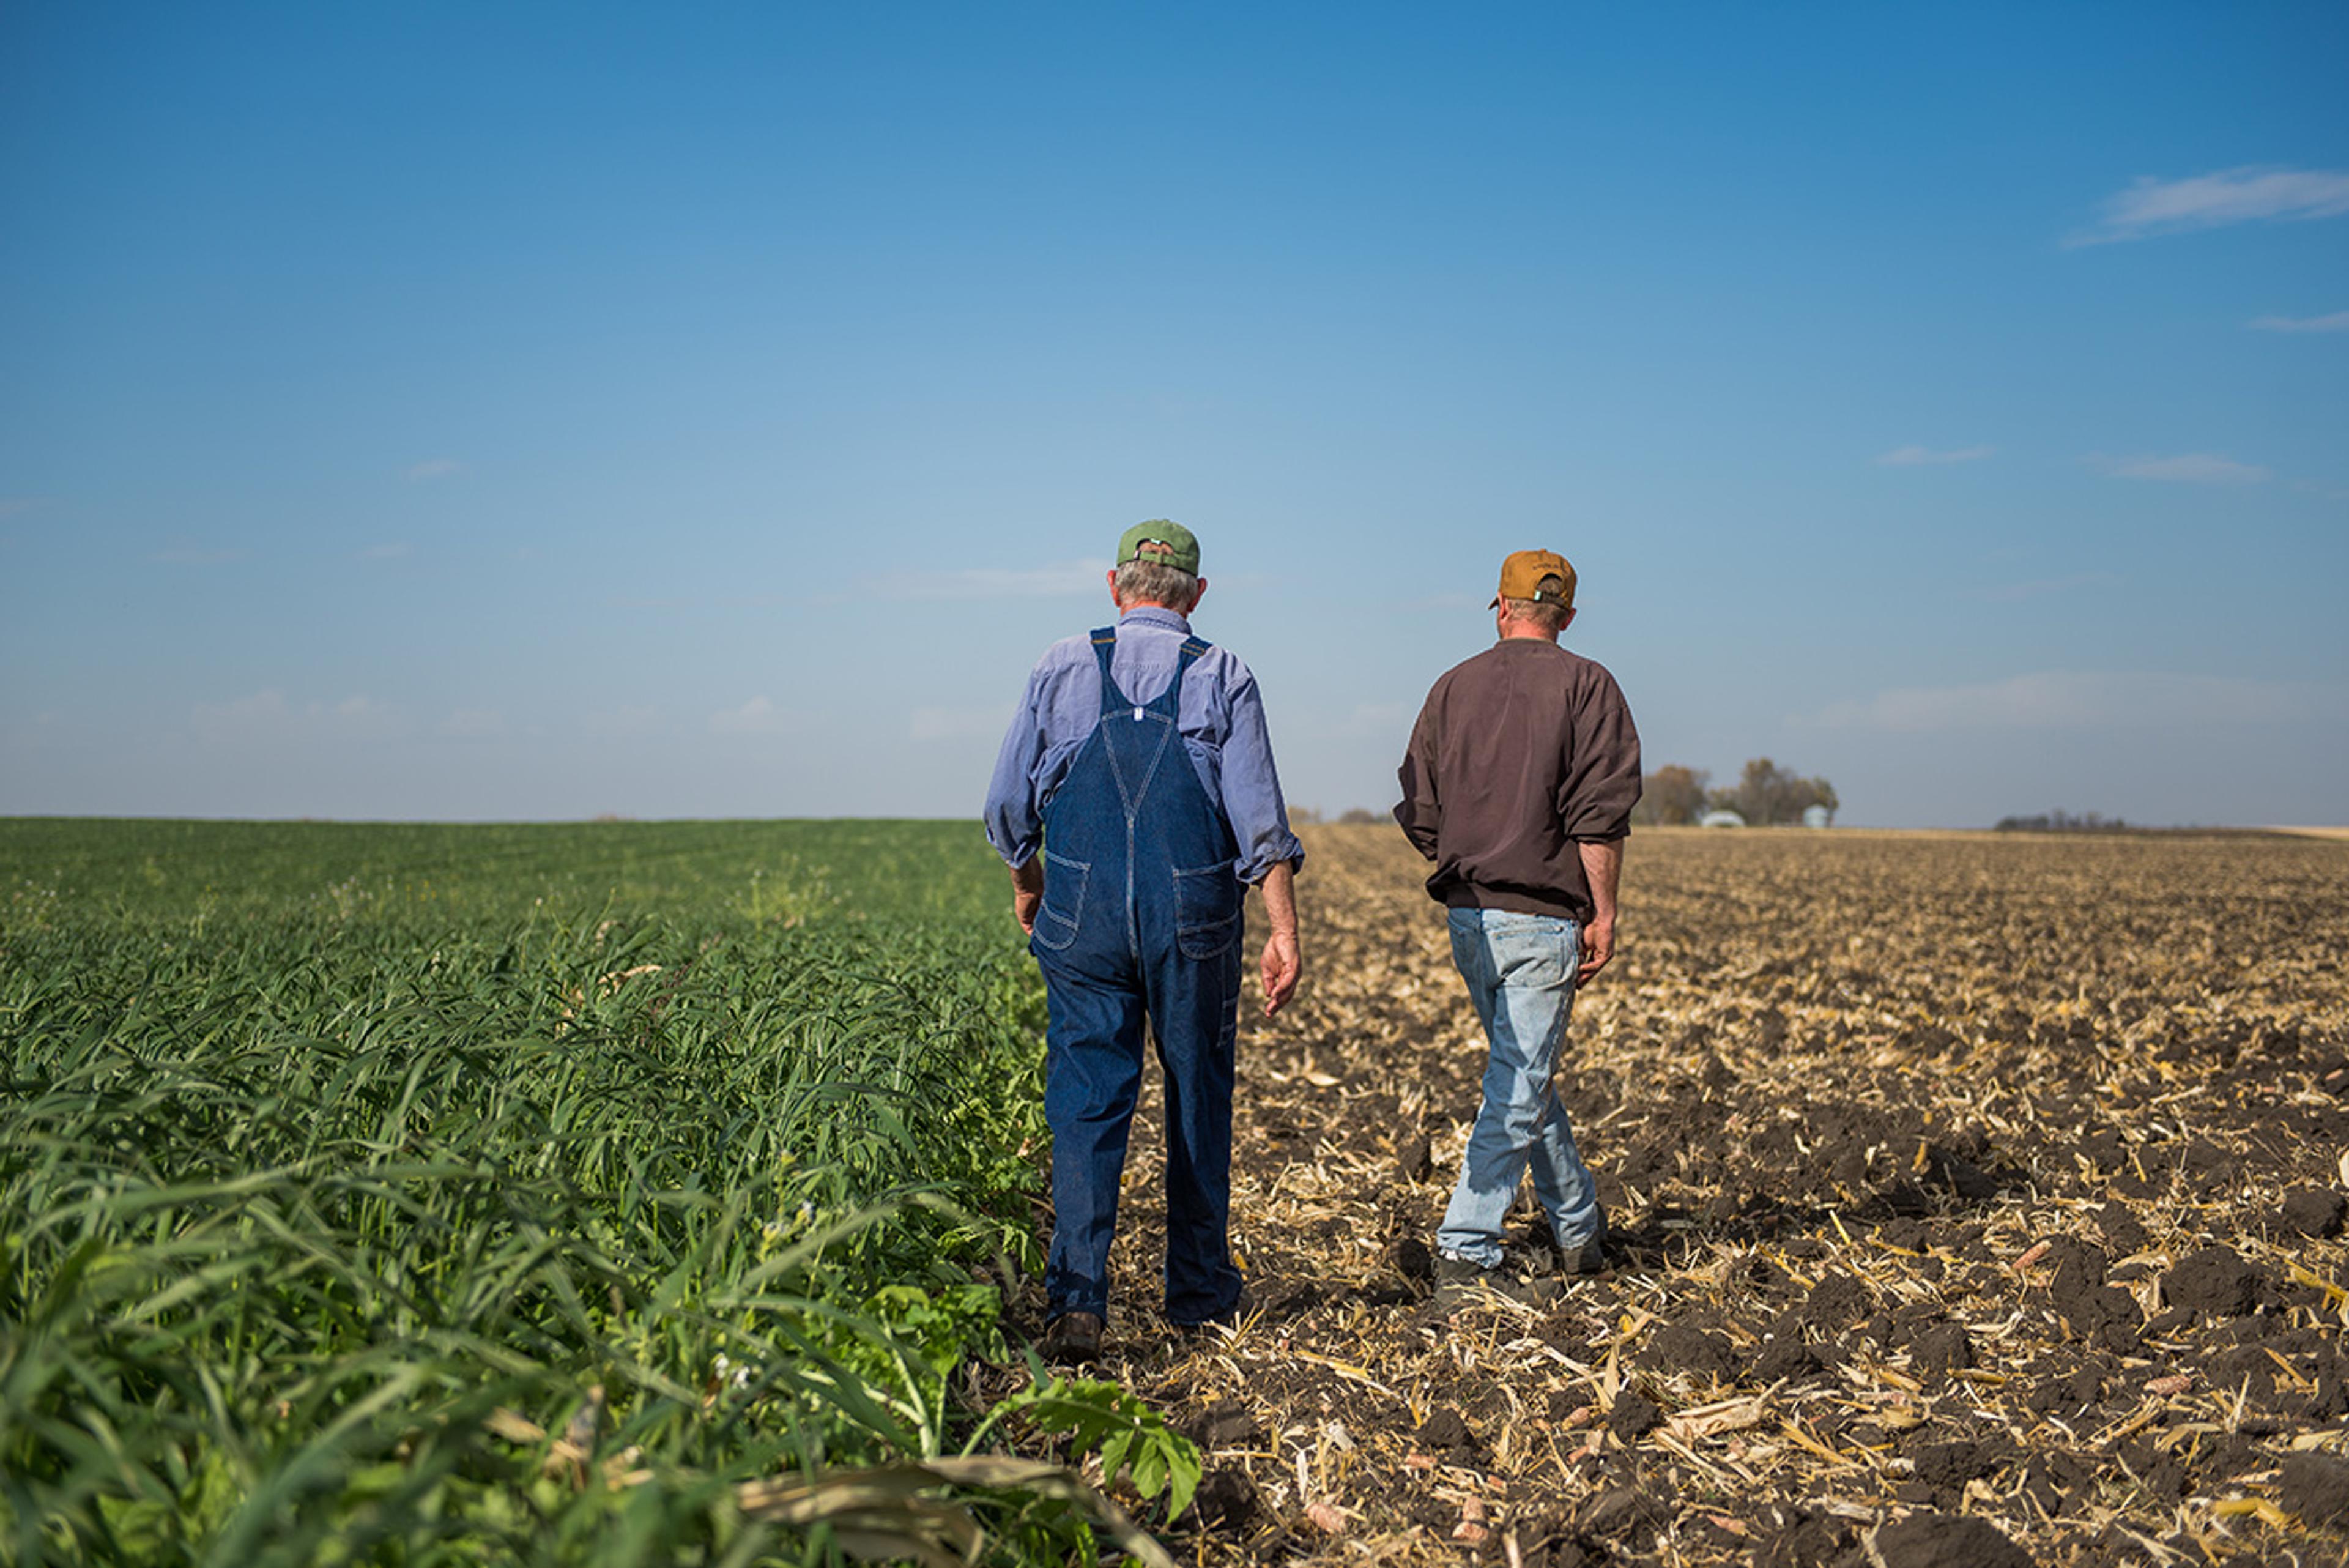 Two men walk in a field where half has been tilled and half is growing a lush green crop.